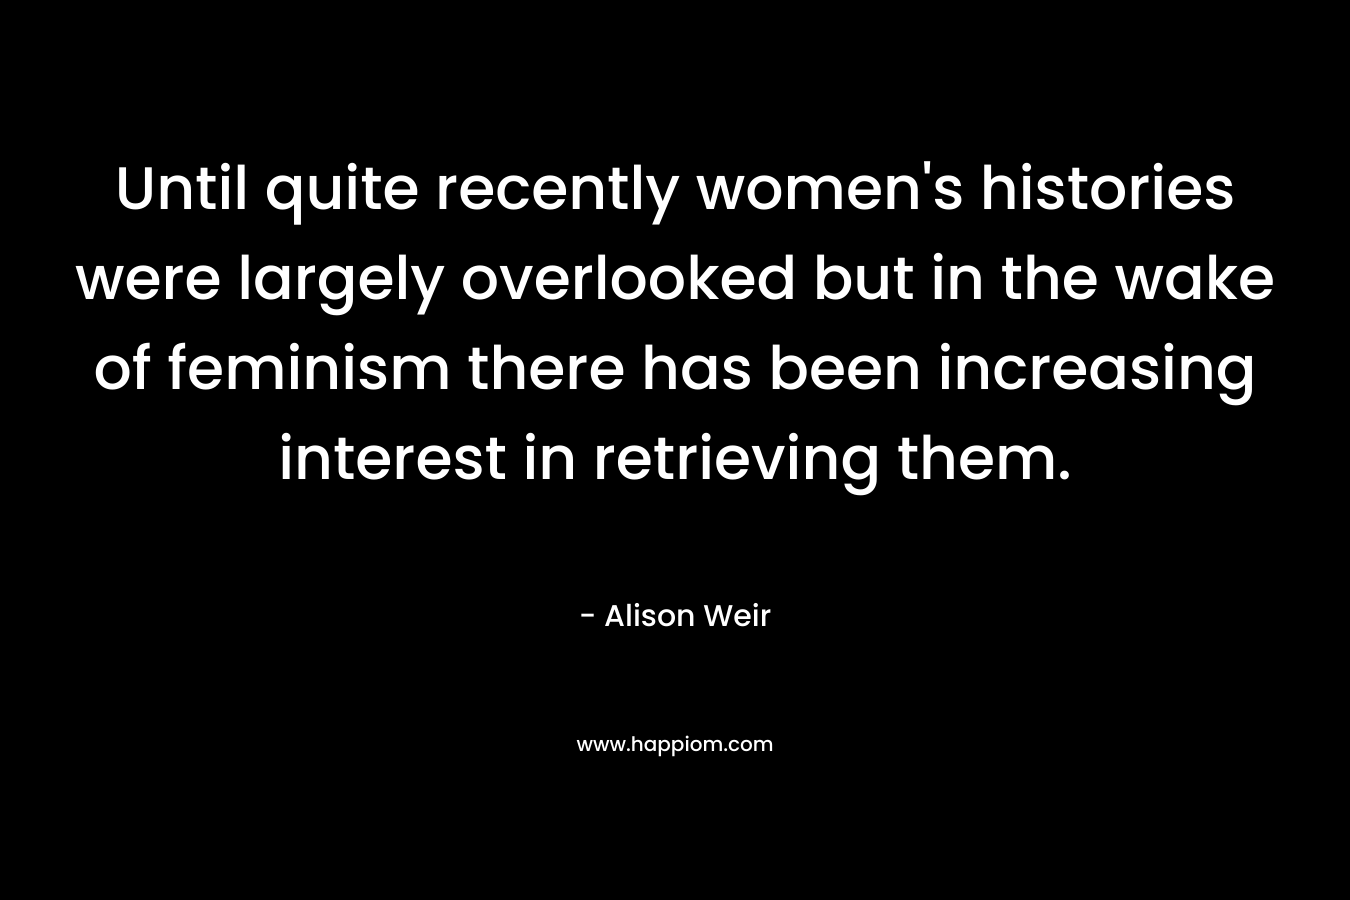 Until quite recently women’s histories were largely overlooked but in the wake of feminism there has been increasing interest in retrieving them. – Alison Weir